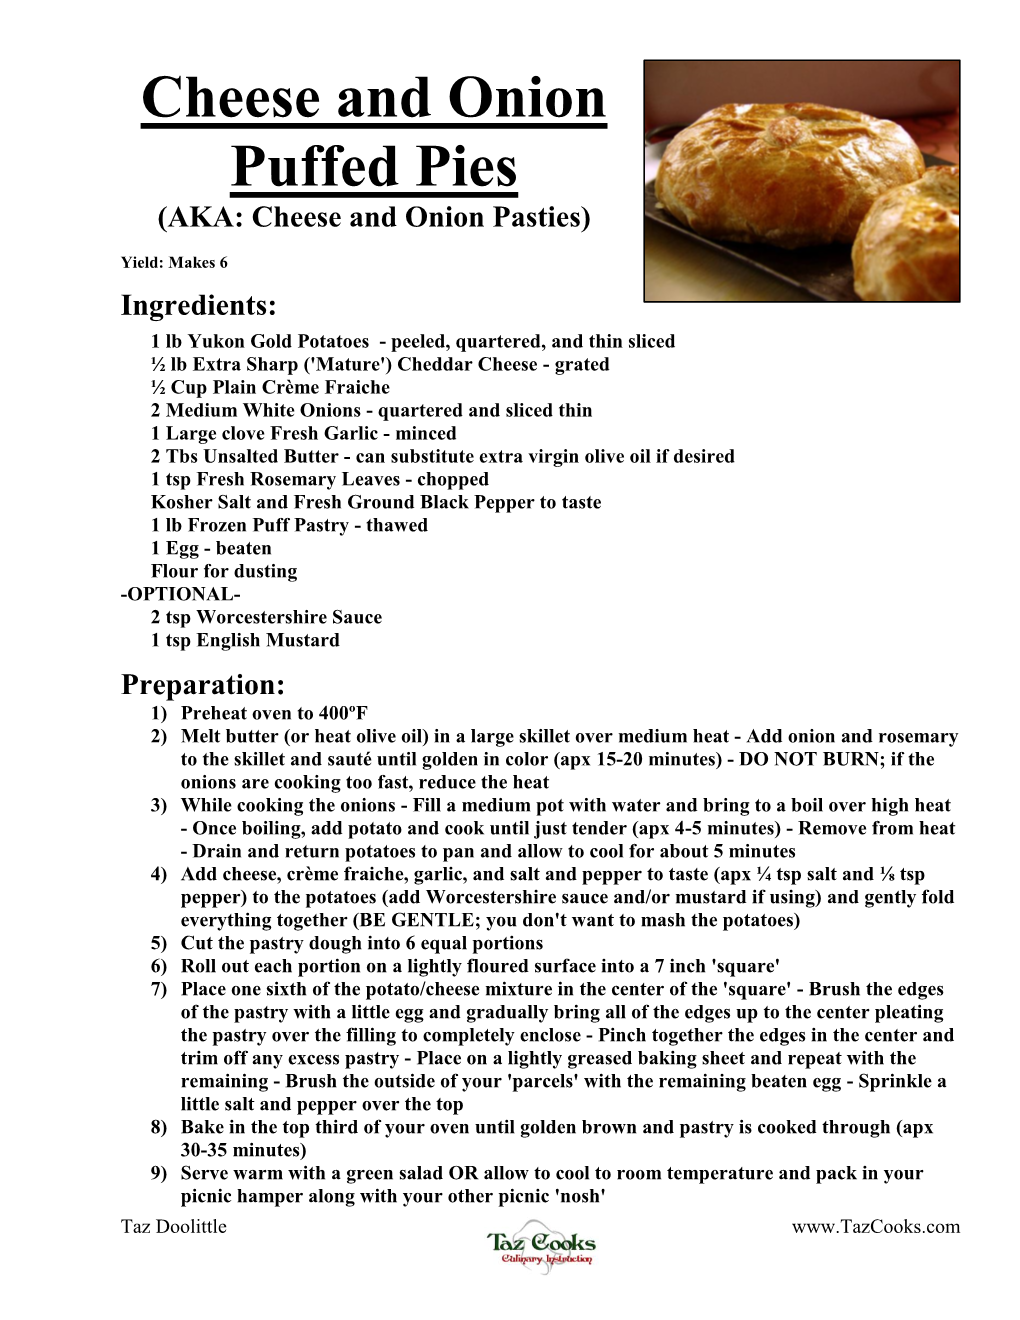 Cheese and Onion Puffed Pies (AKA: Cheese and Onion Pasties)